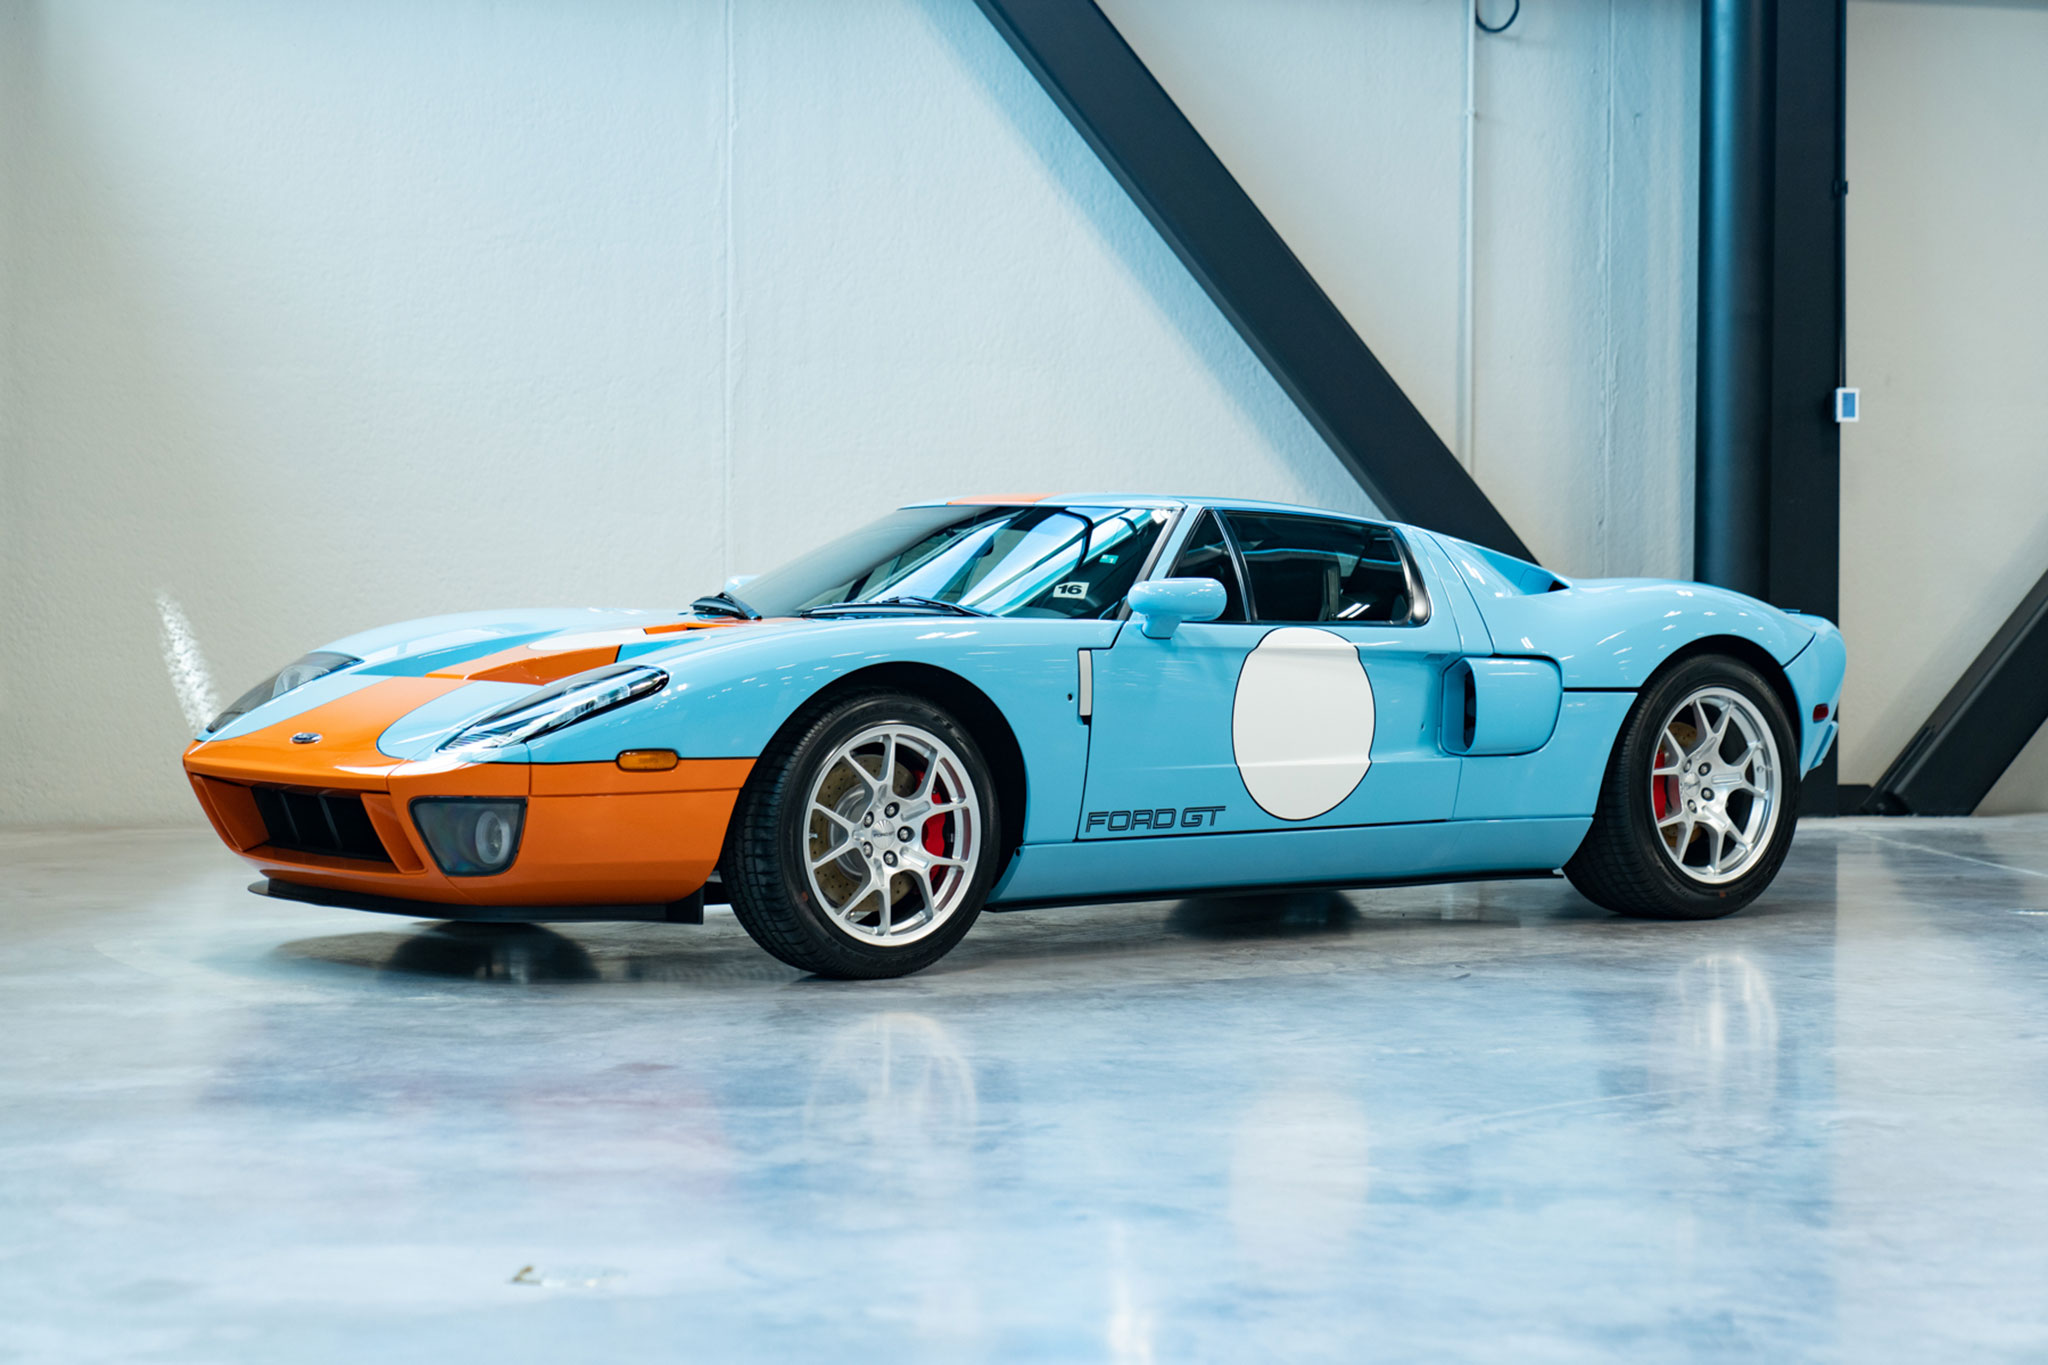 2006 Ford GT Heritage Edition - estimation $US 575 à 650 000 - Pebble Beach Gooding & Company.